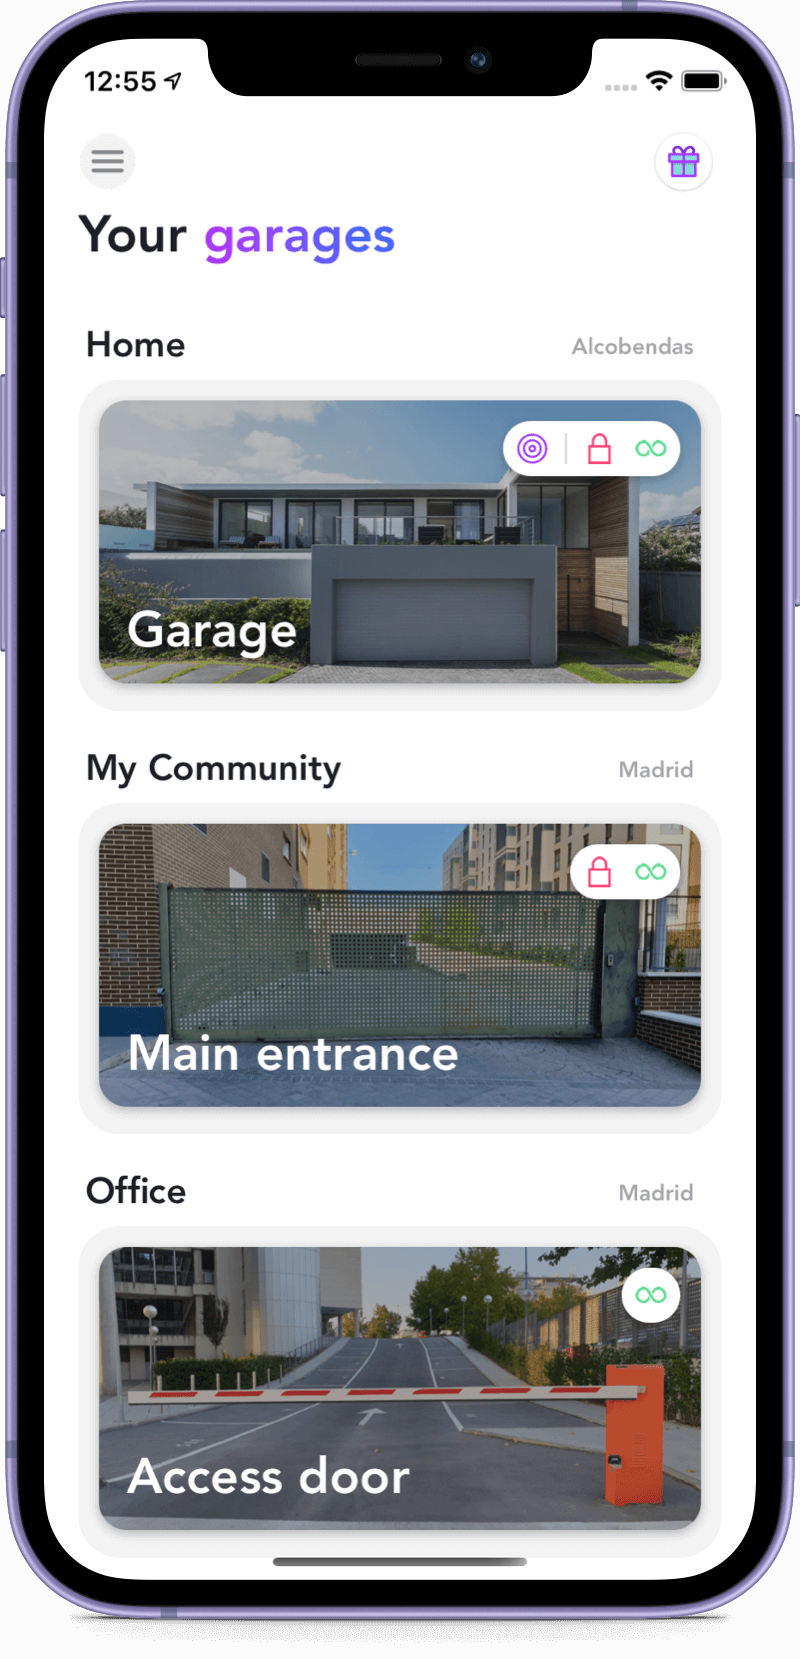 Open your garage with your mobile phone